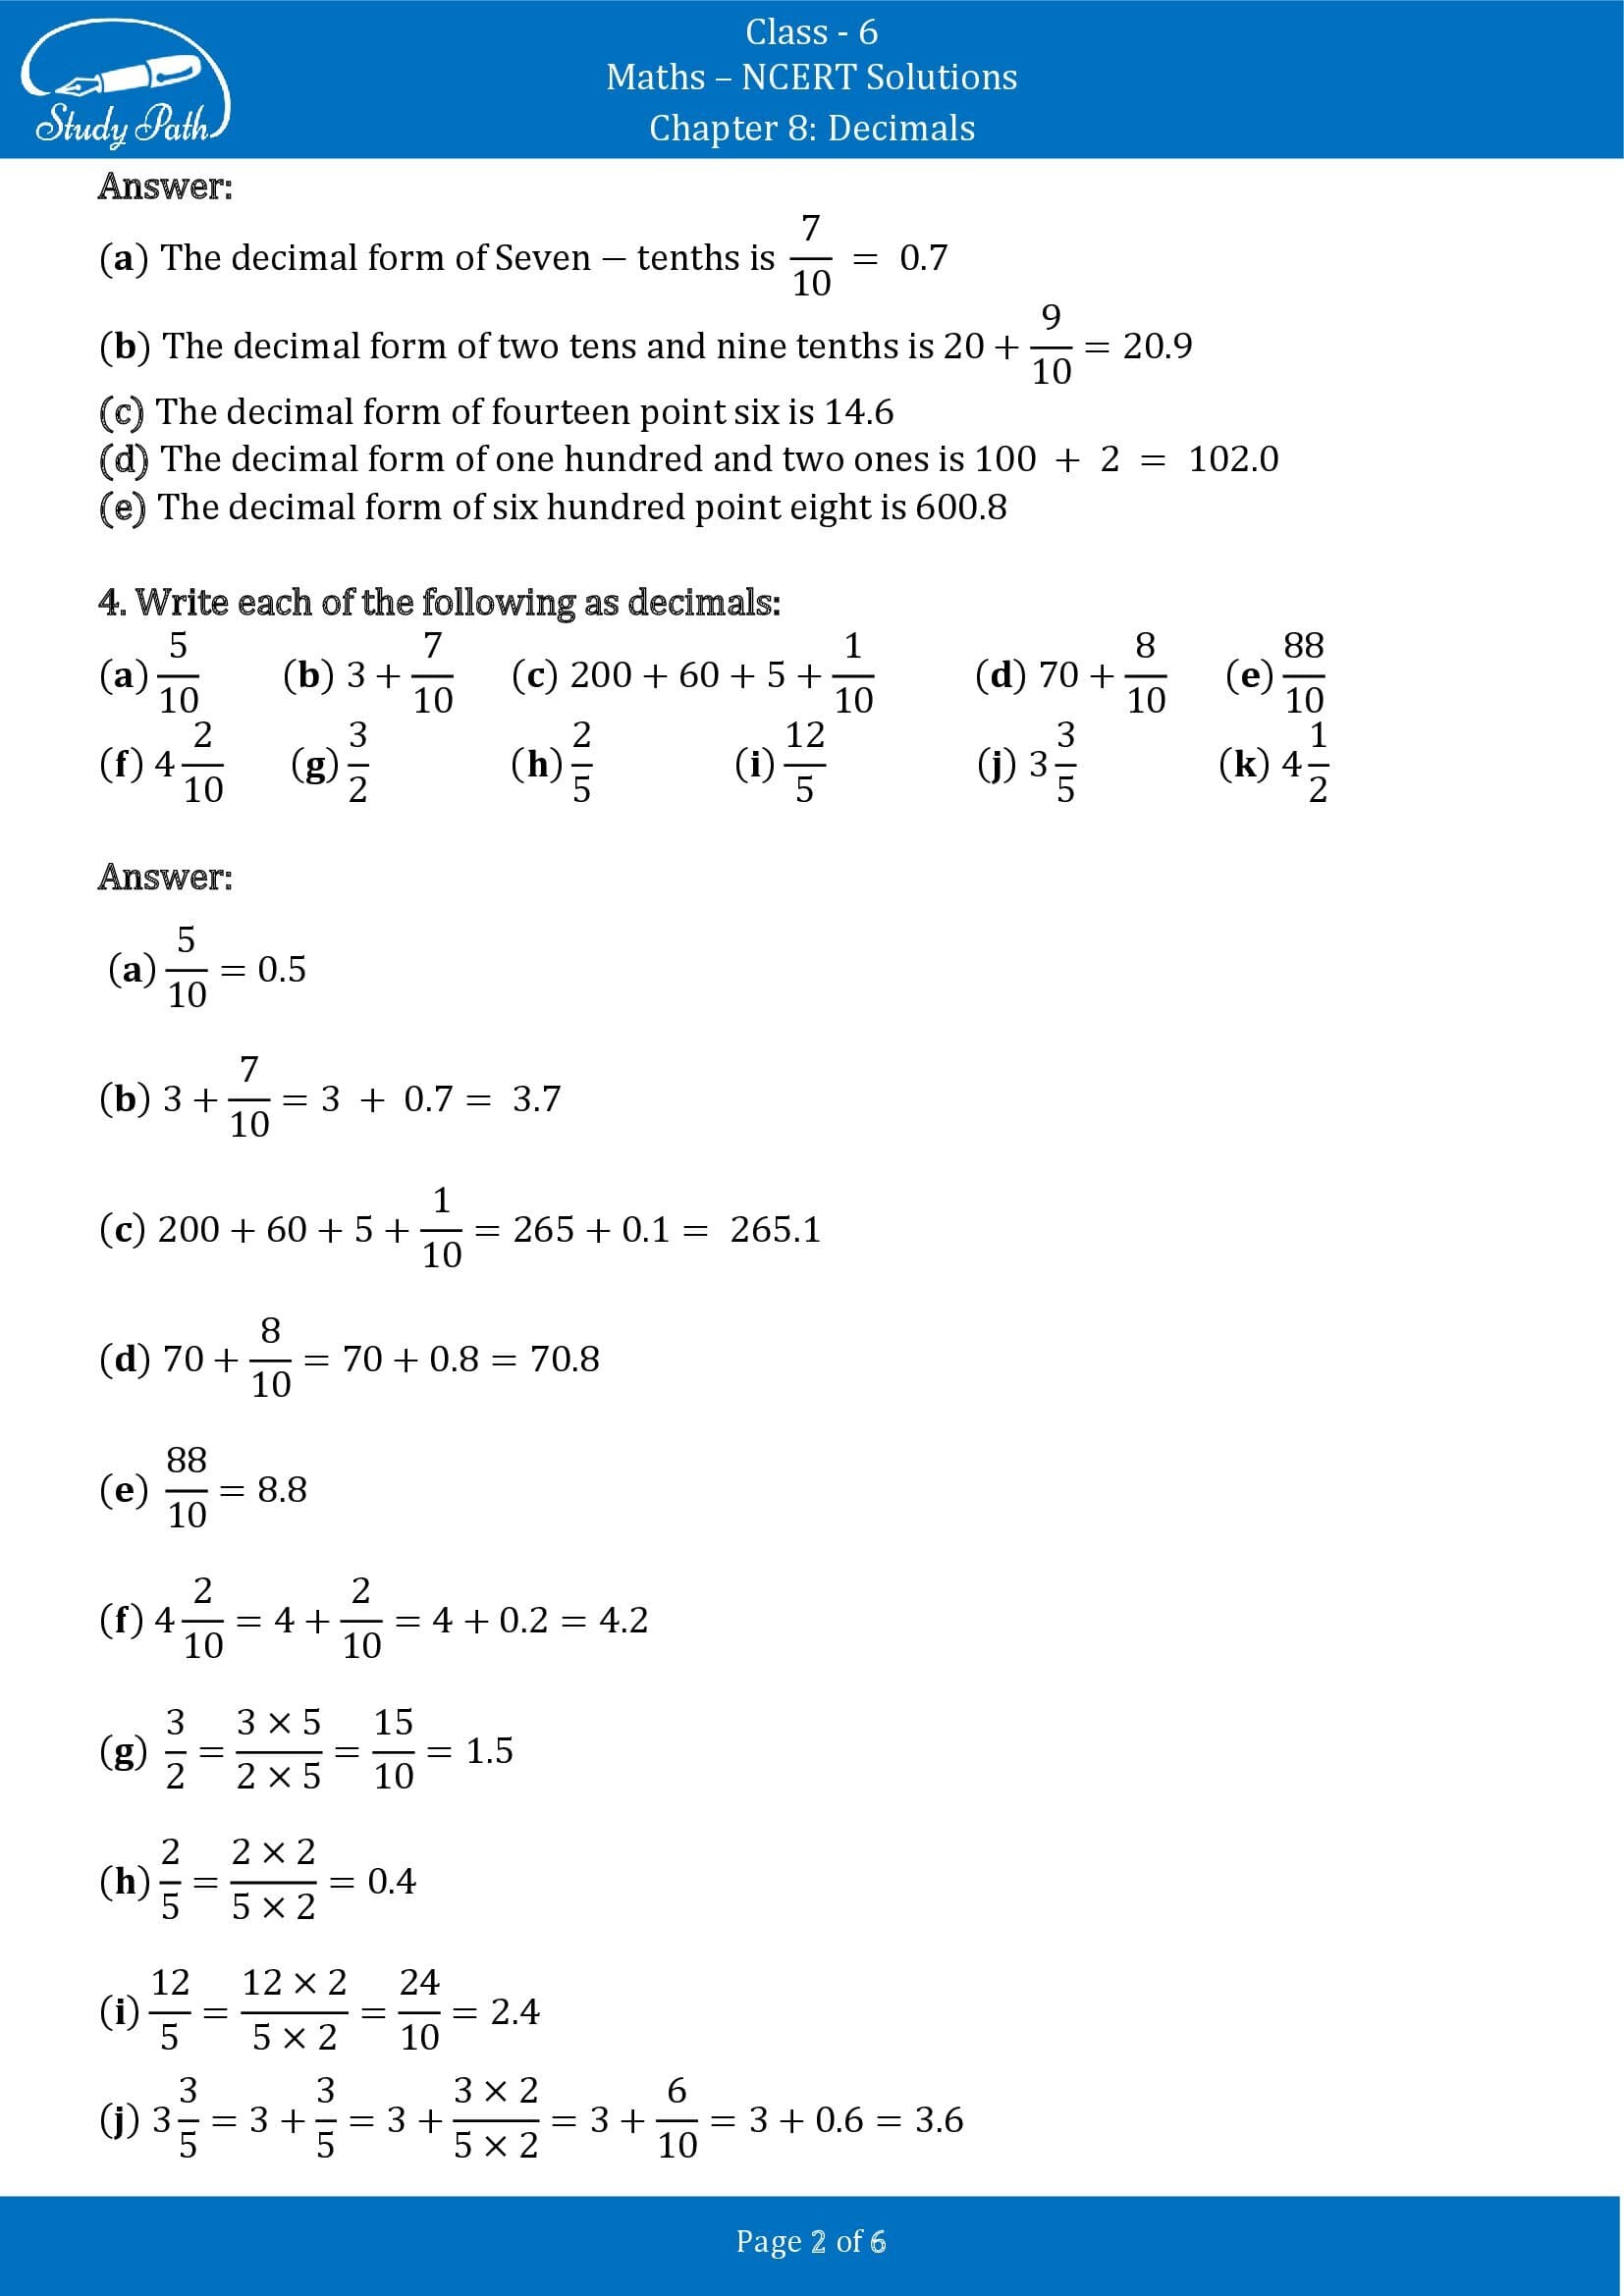 NCERT Solutions for Class 6 Maths Chapter 8 Decimals Exercise 8.1 00002